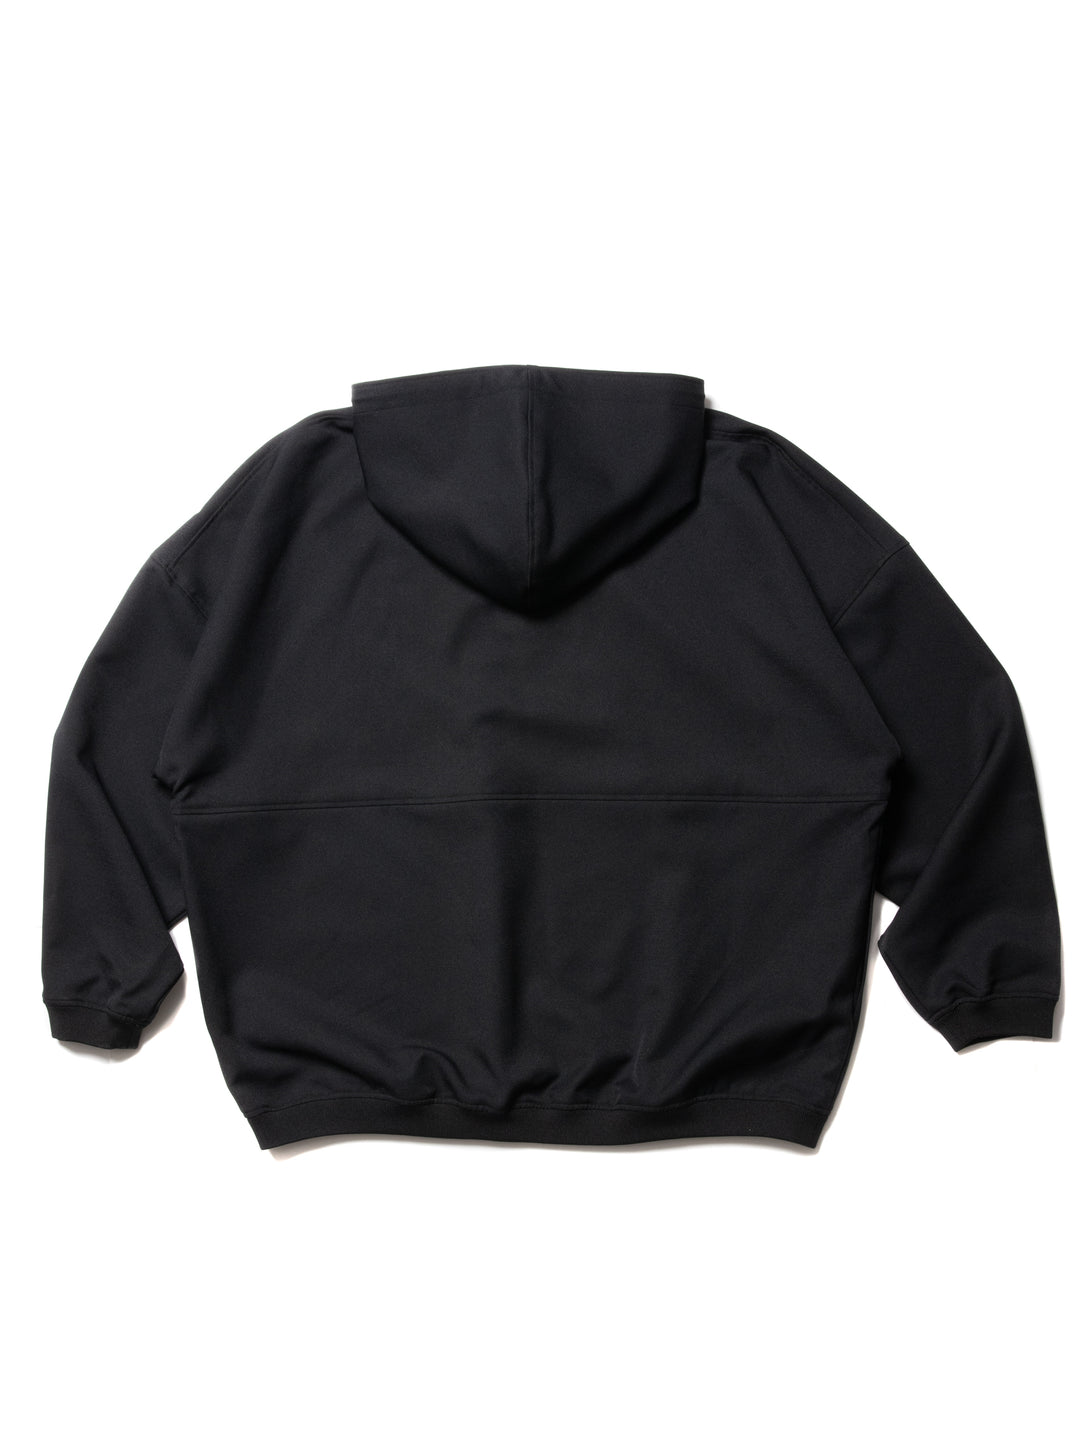 COOTIE PRODUCTIONS POLYESTER TWILL HALF ZIP HOODIE